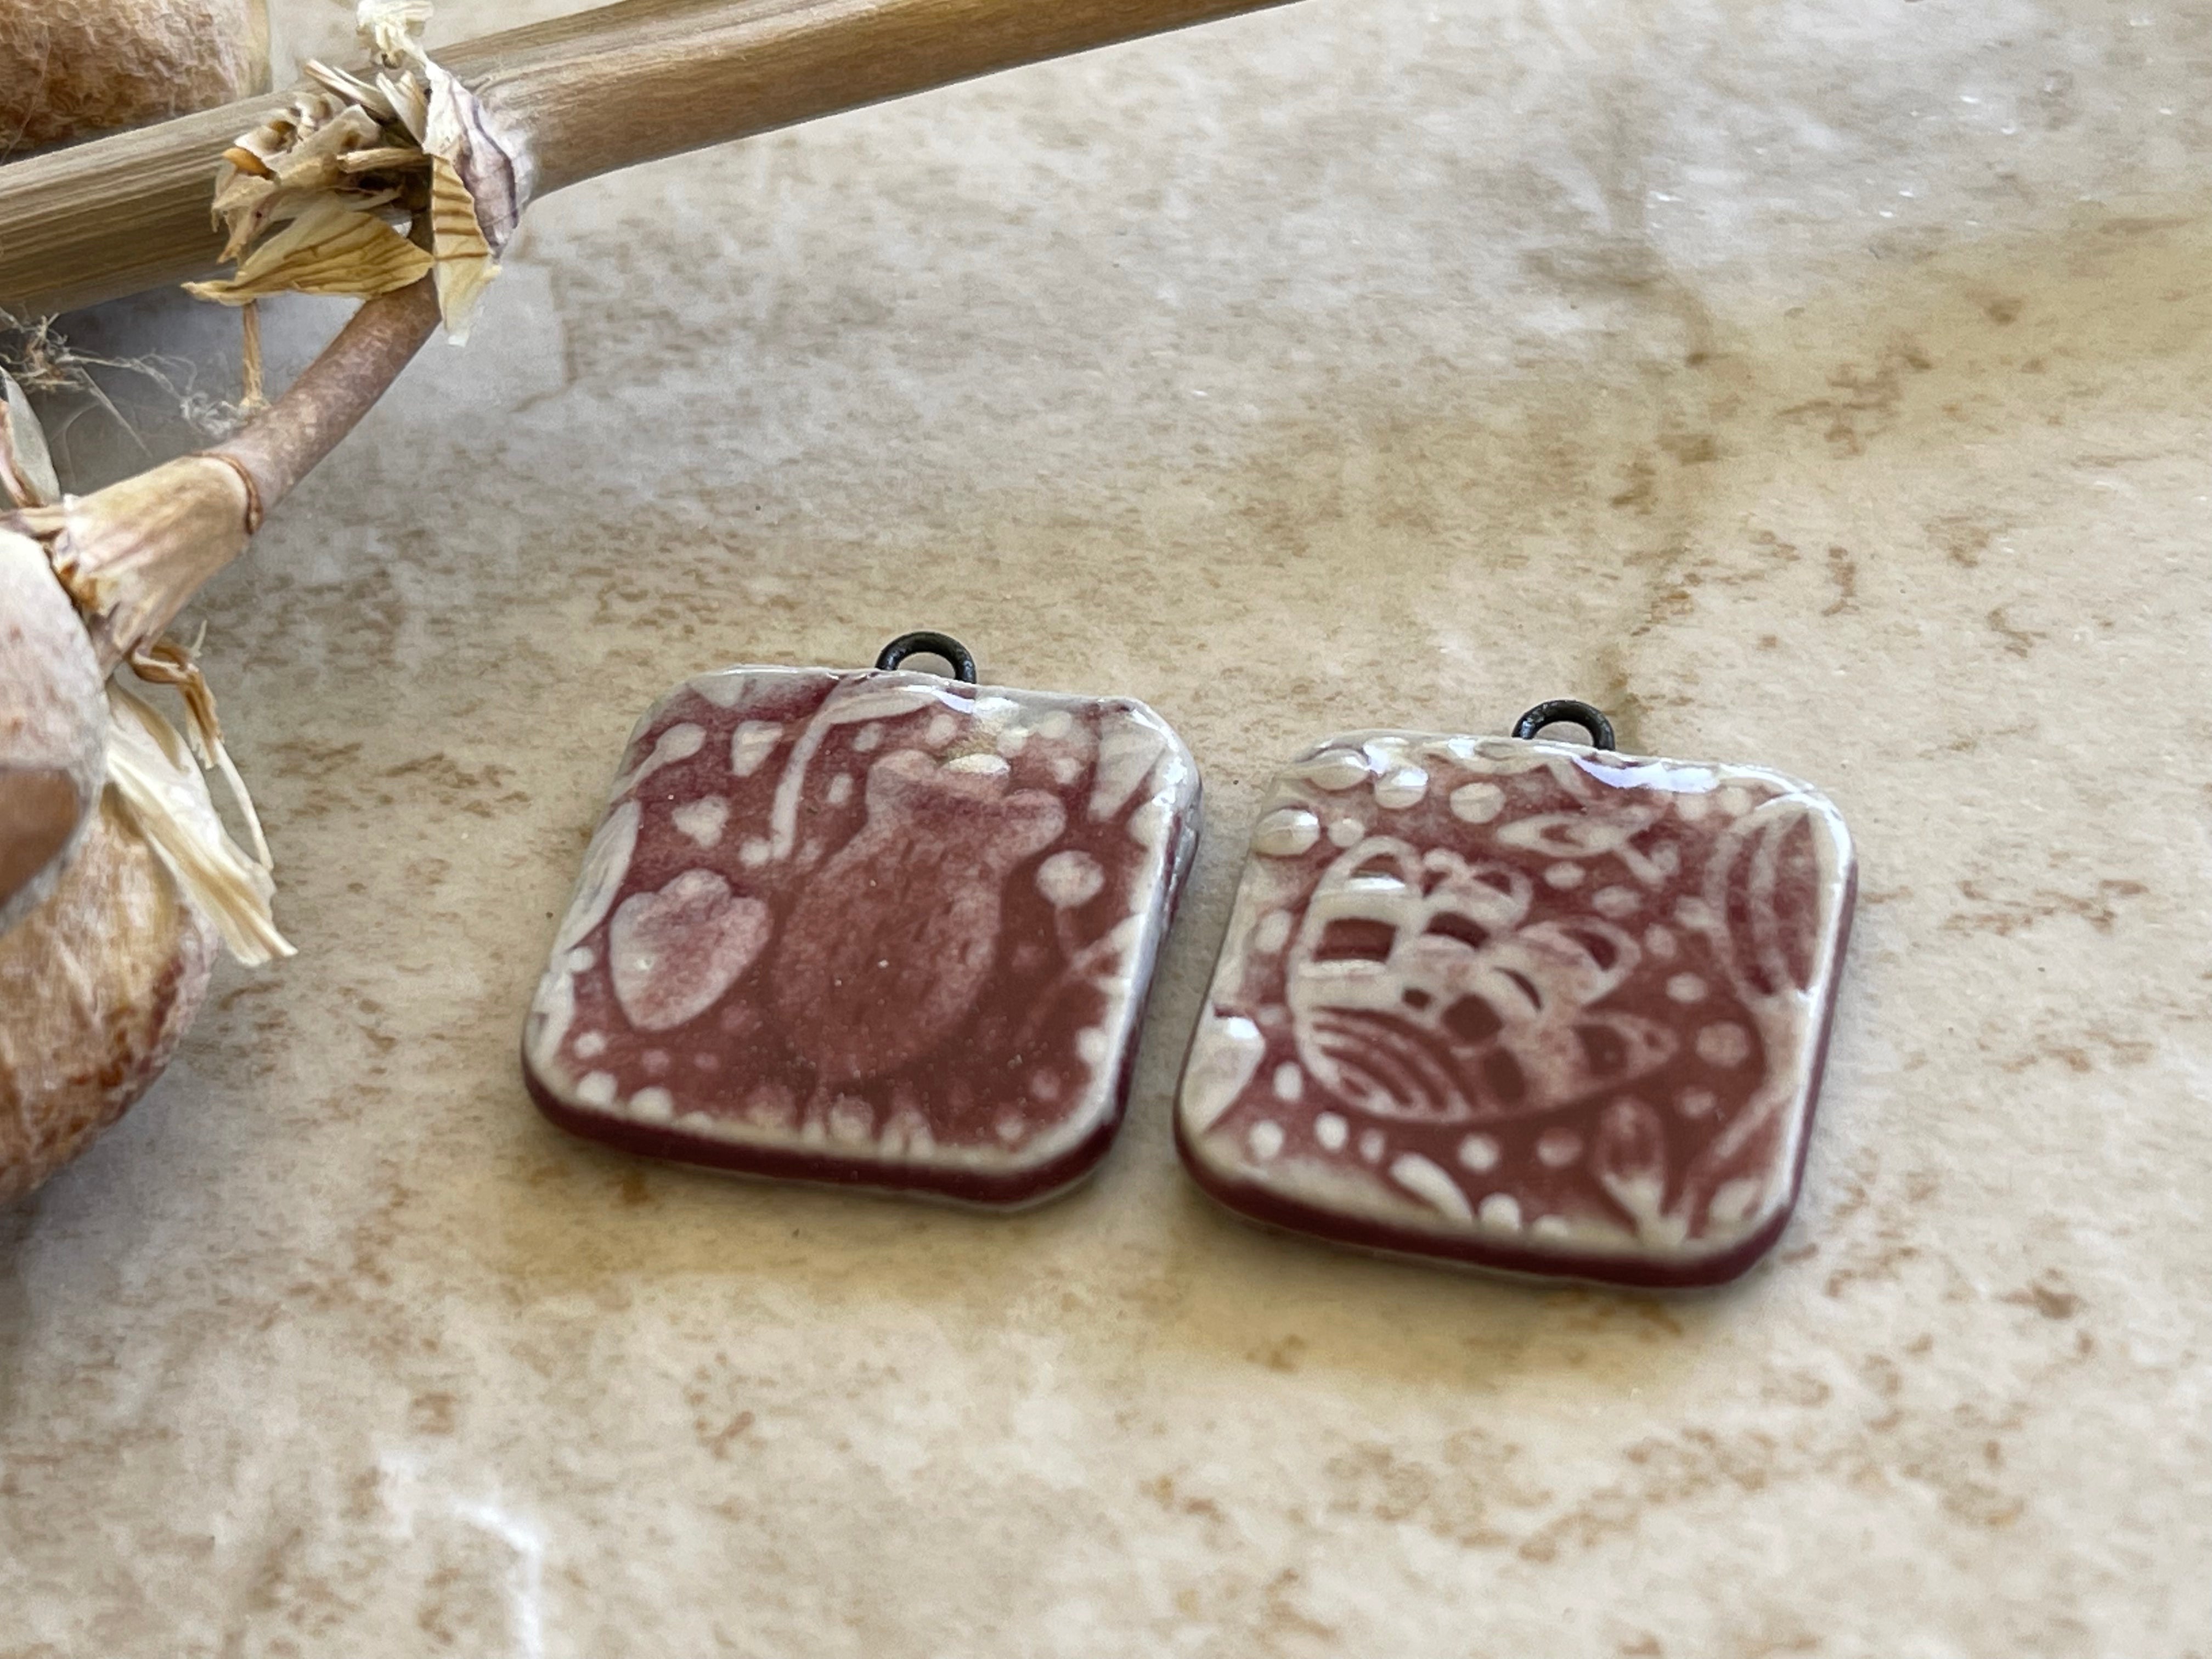 Burgundy Square Floral , Earring Bead Pair, Porcelain Charms, Ceramic Charms, Jewelry Making Components, Beading Handmade, DIY Earrings, DIY Beads